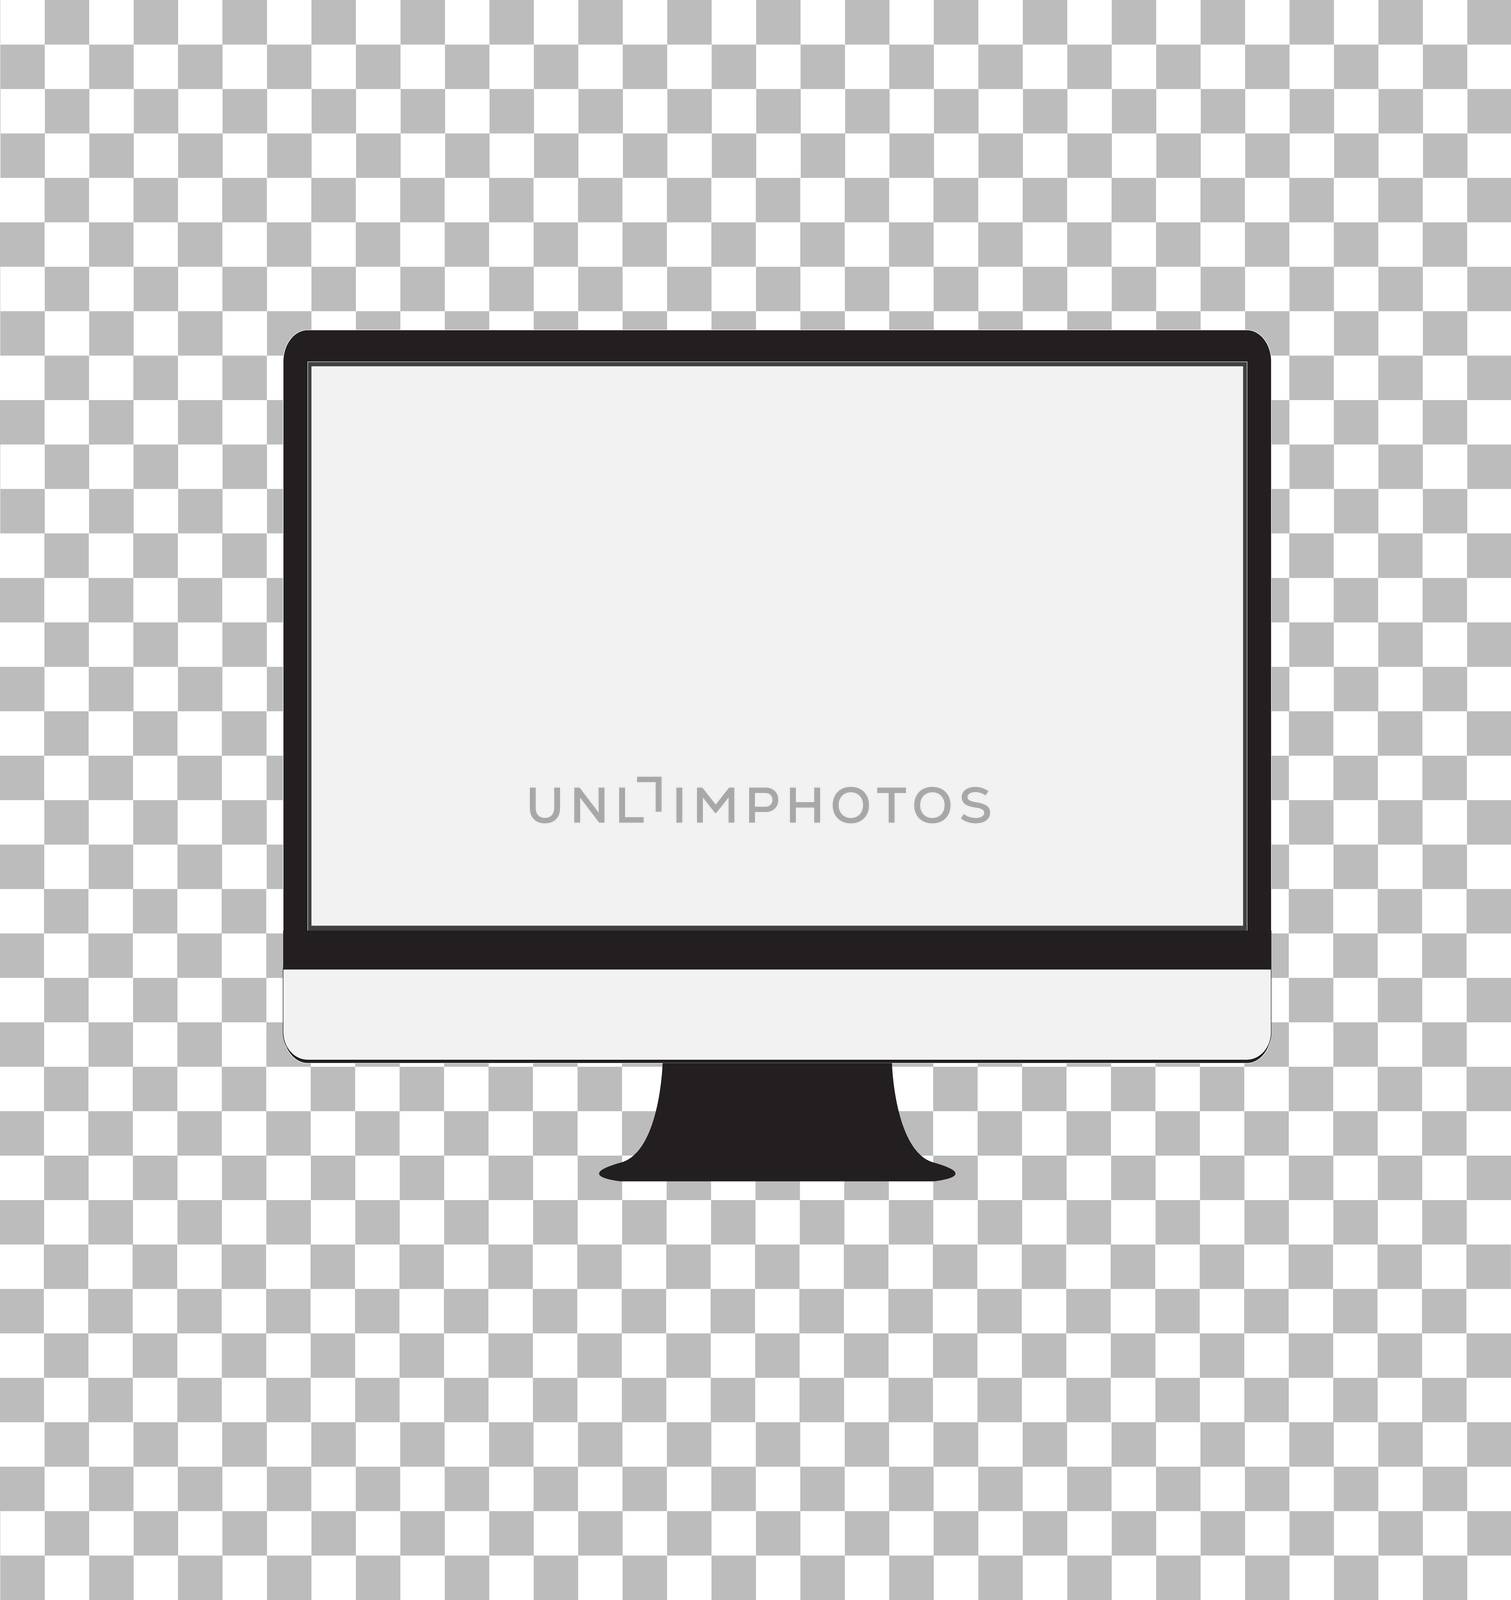 computer monitor isolated on white background. computer monitor sign. flat design style. 